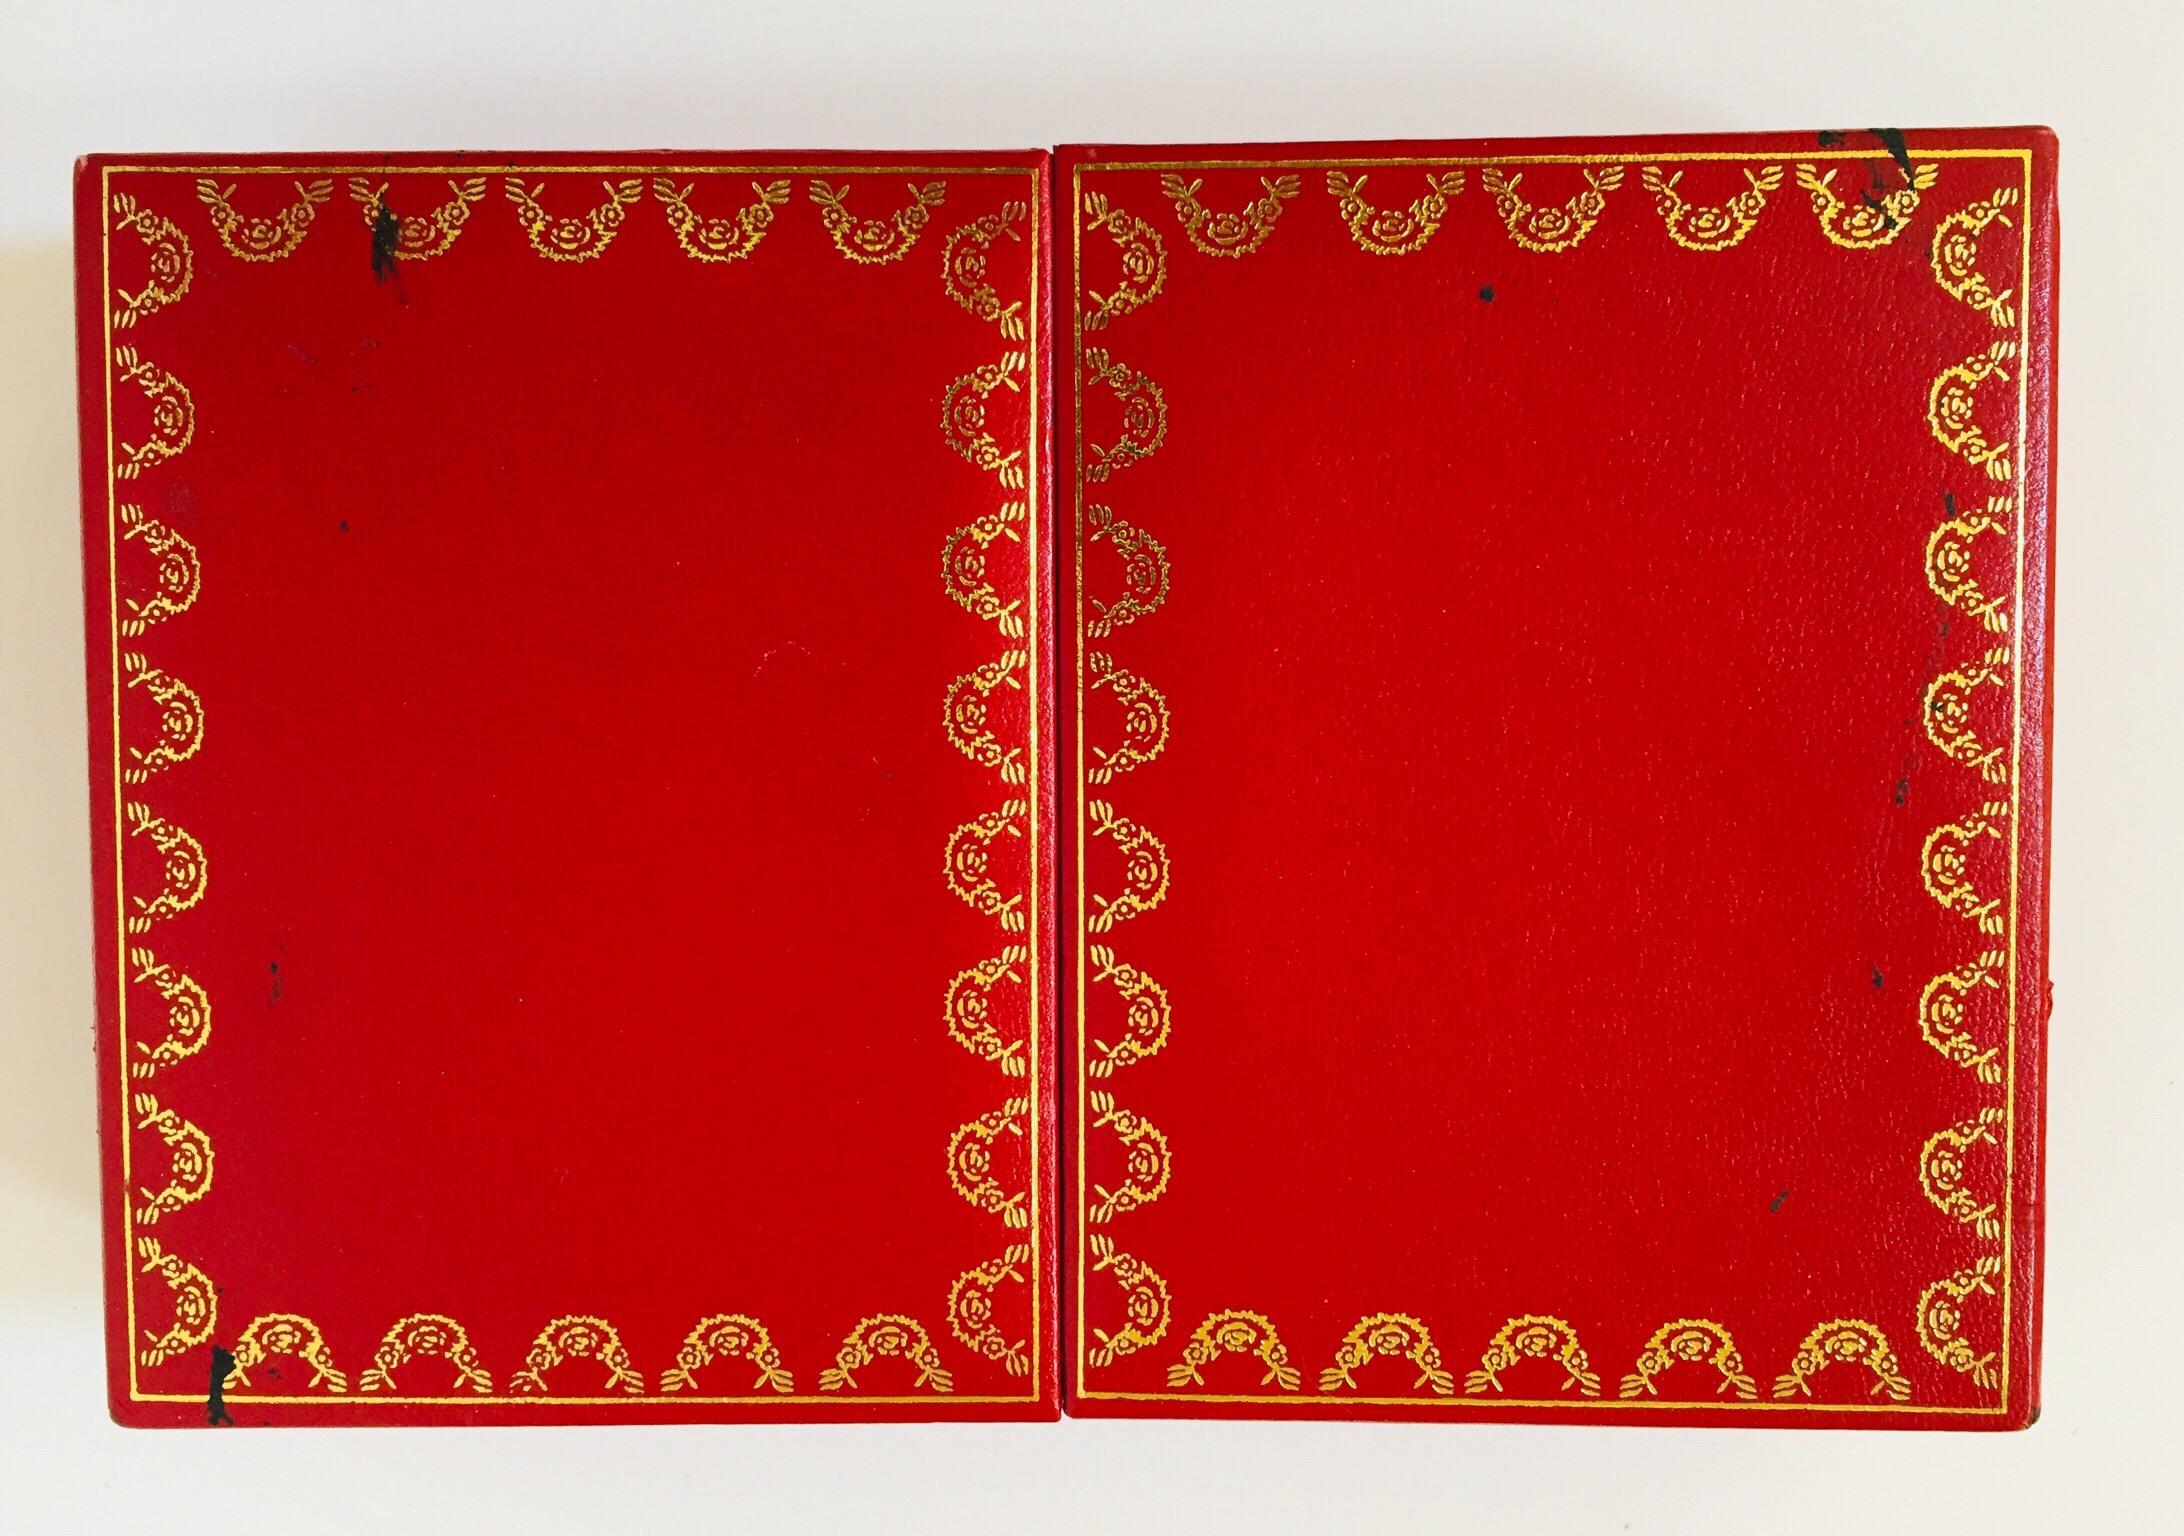 Must de Cartier Paris Vintage Playing Poker or Bridge Cards in Red Box 6